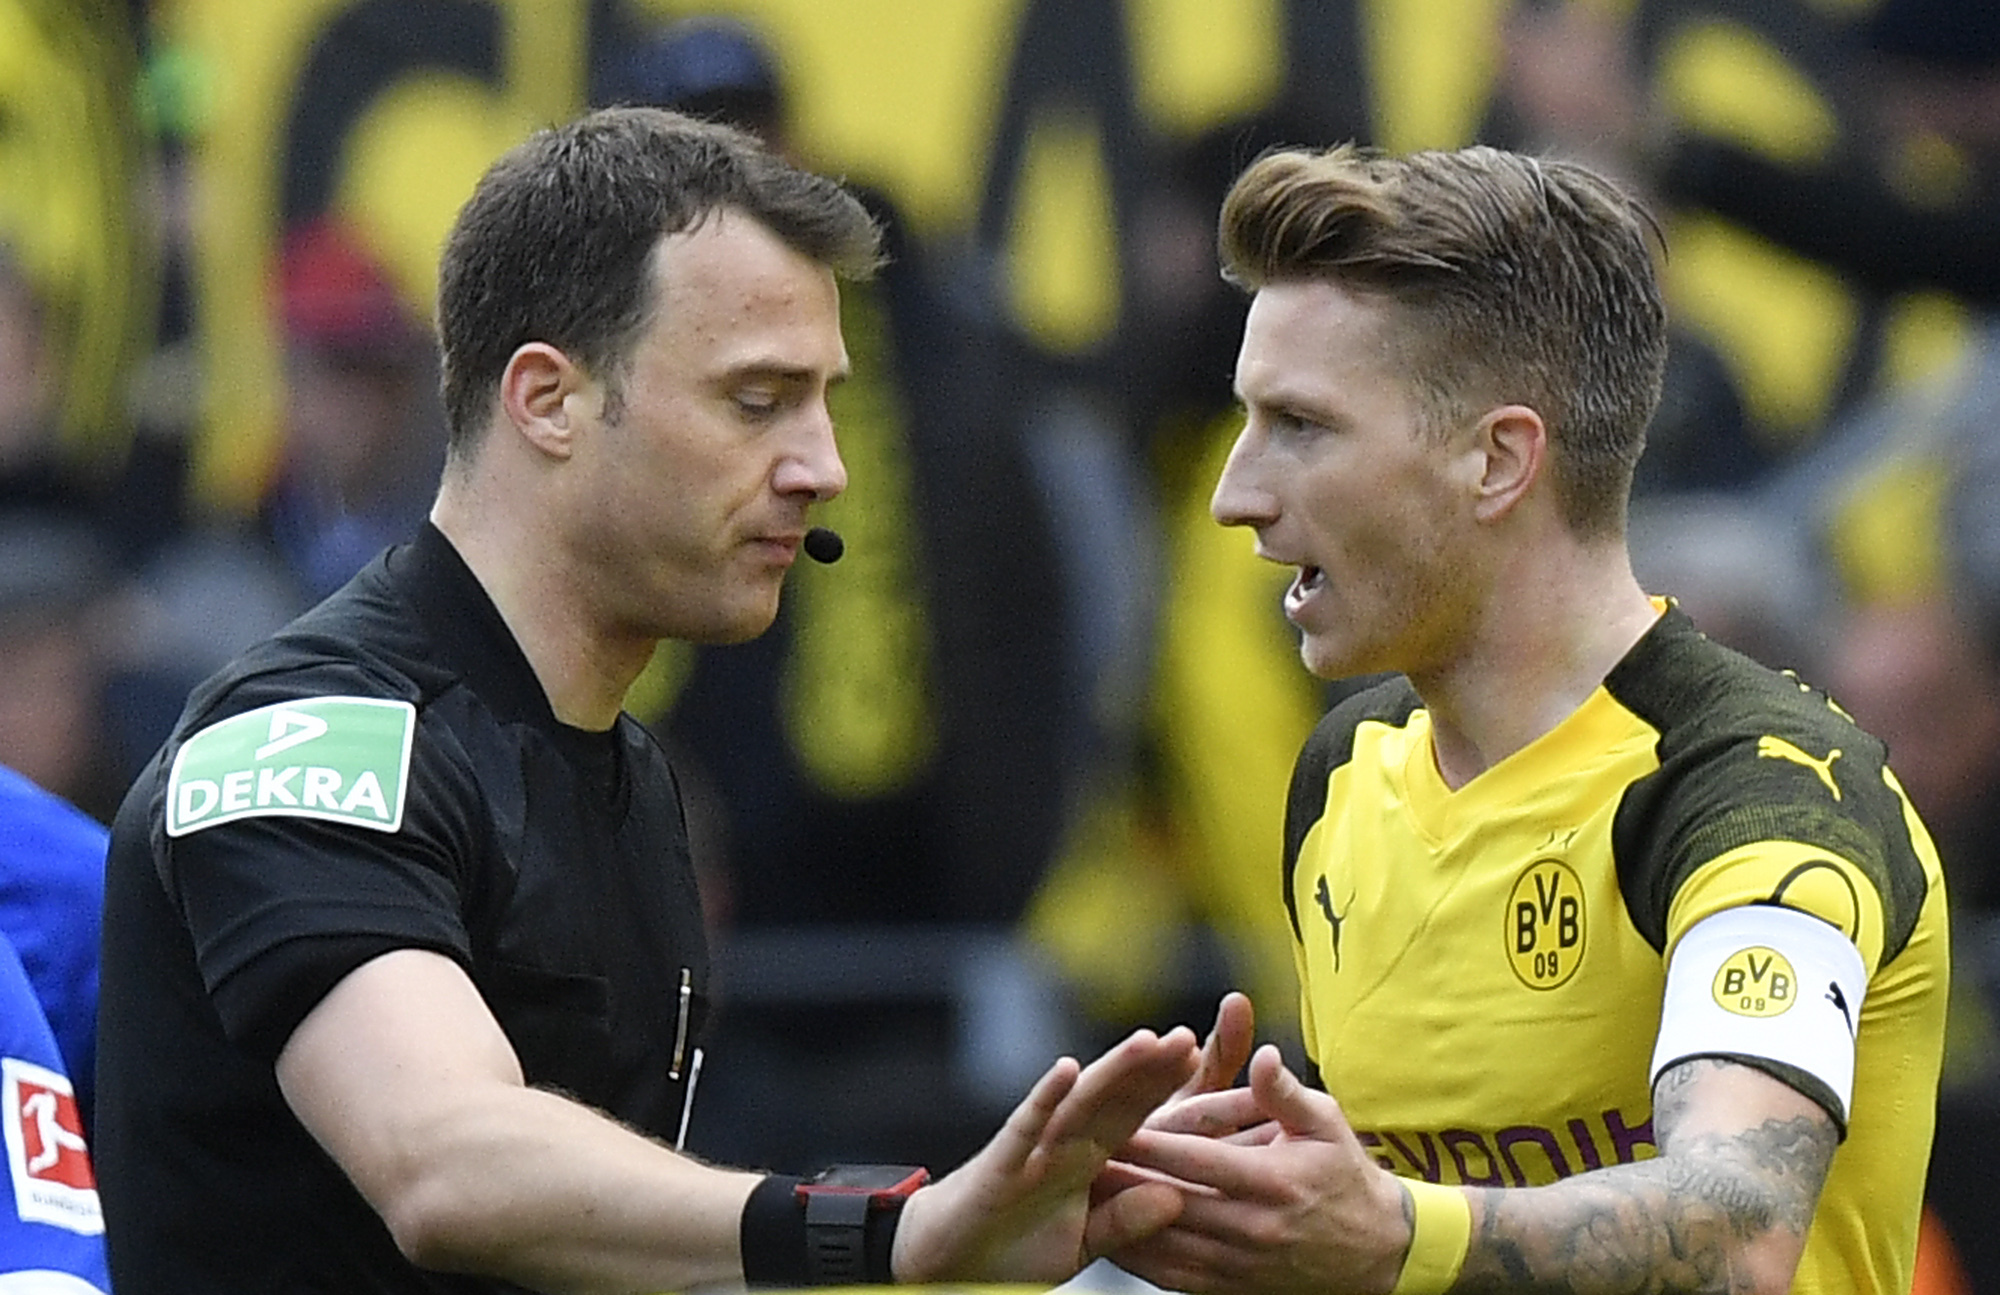 Referee Felix Zwayer talks to Dortmund's Marco Reus after he he gave him a red card during the German Bundesliga soccer match between Borussia Dortmund and FC Schalke 04 in Dortmund, Germany, Saturday, April 27, 2019. Dortmund was defeated in the Derby by Schalke with 2-4. (AP Photo/Martin Meissner)